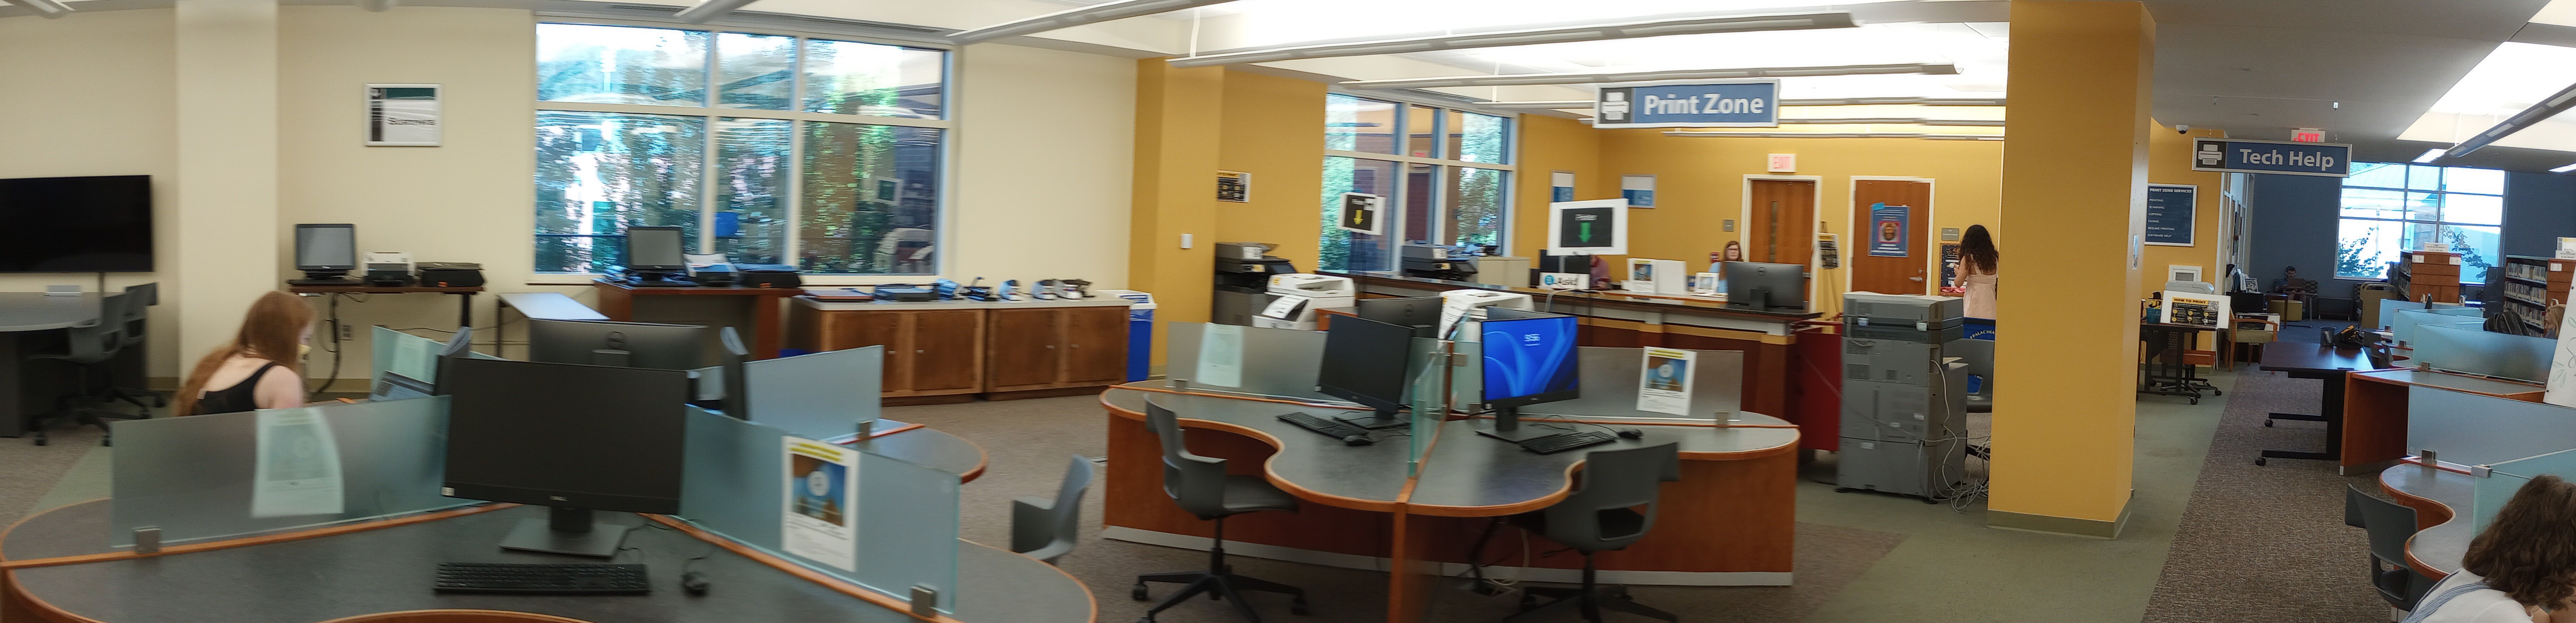 Print Zone and Tech Help area on main floor of Belk Library